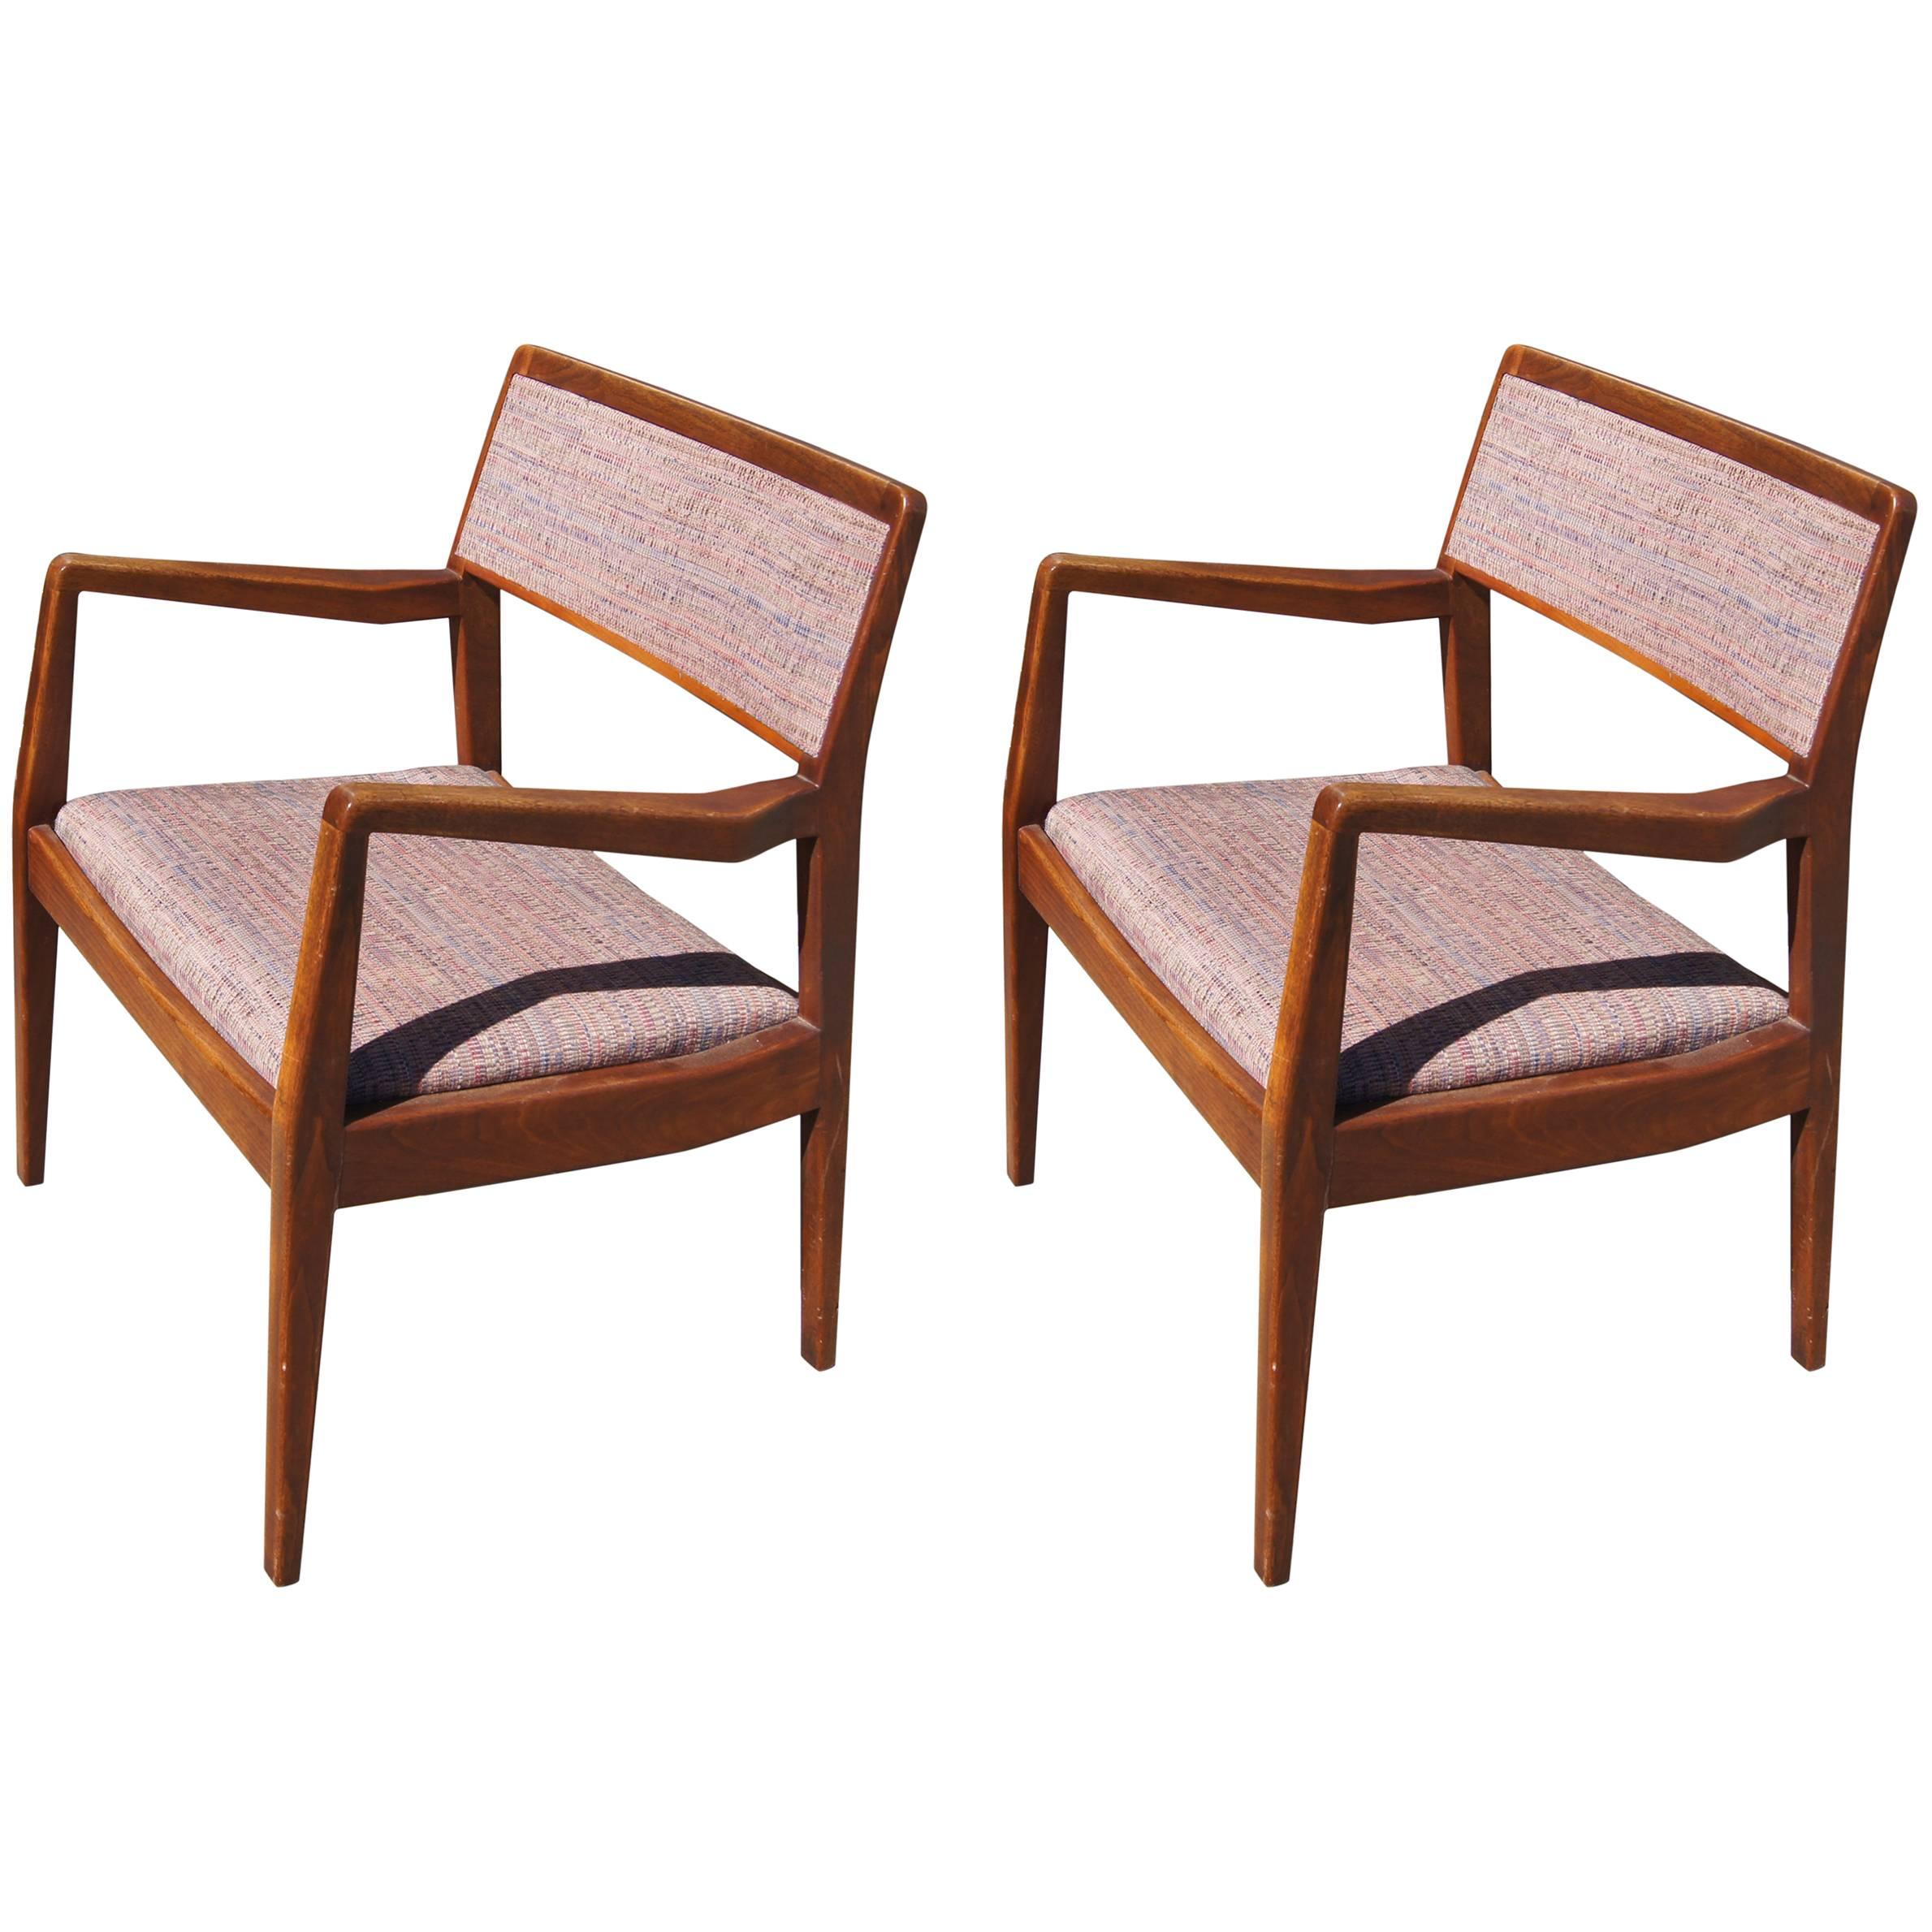 Pair of "Playboy" Armchairs, Model C140, by Jens Risom